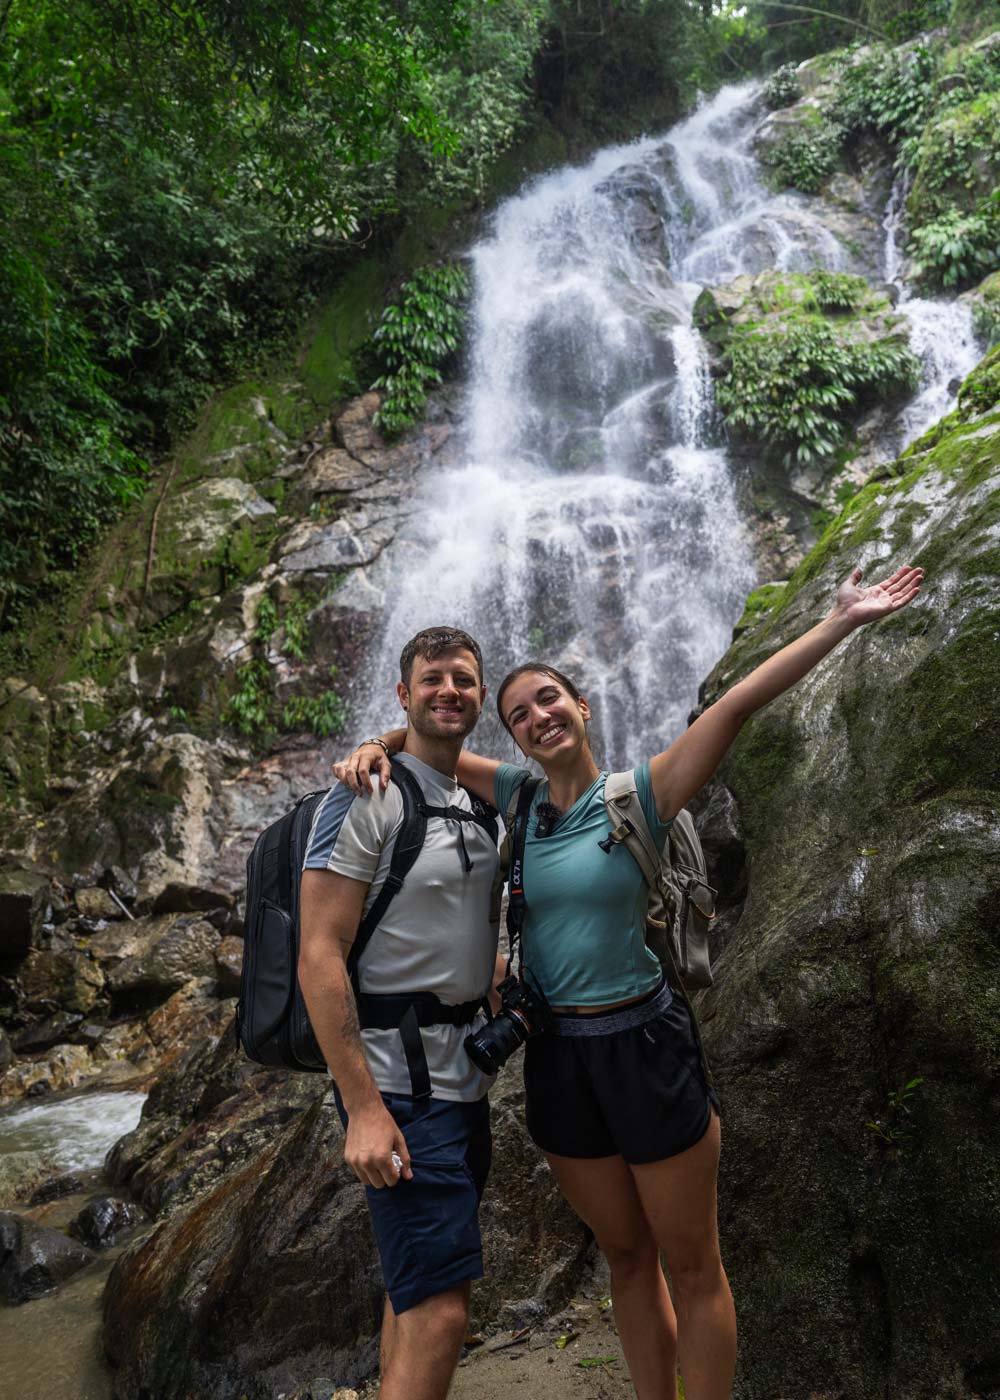 Ryan and Sara in hiking gear with their arms wrapped around each other posing in front of the upper Marinka Waterfall.